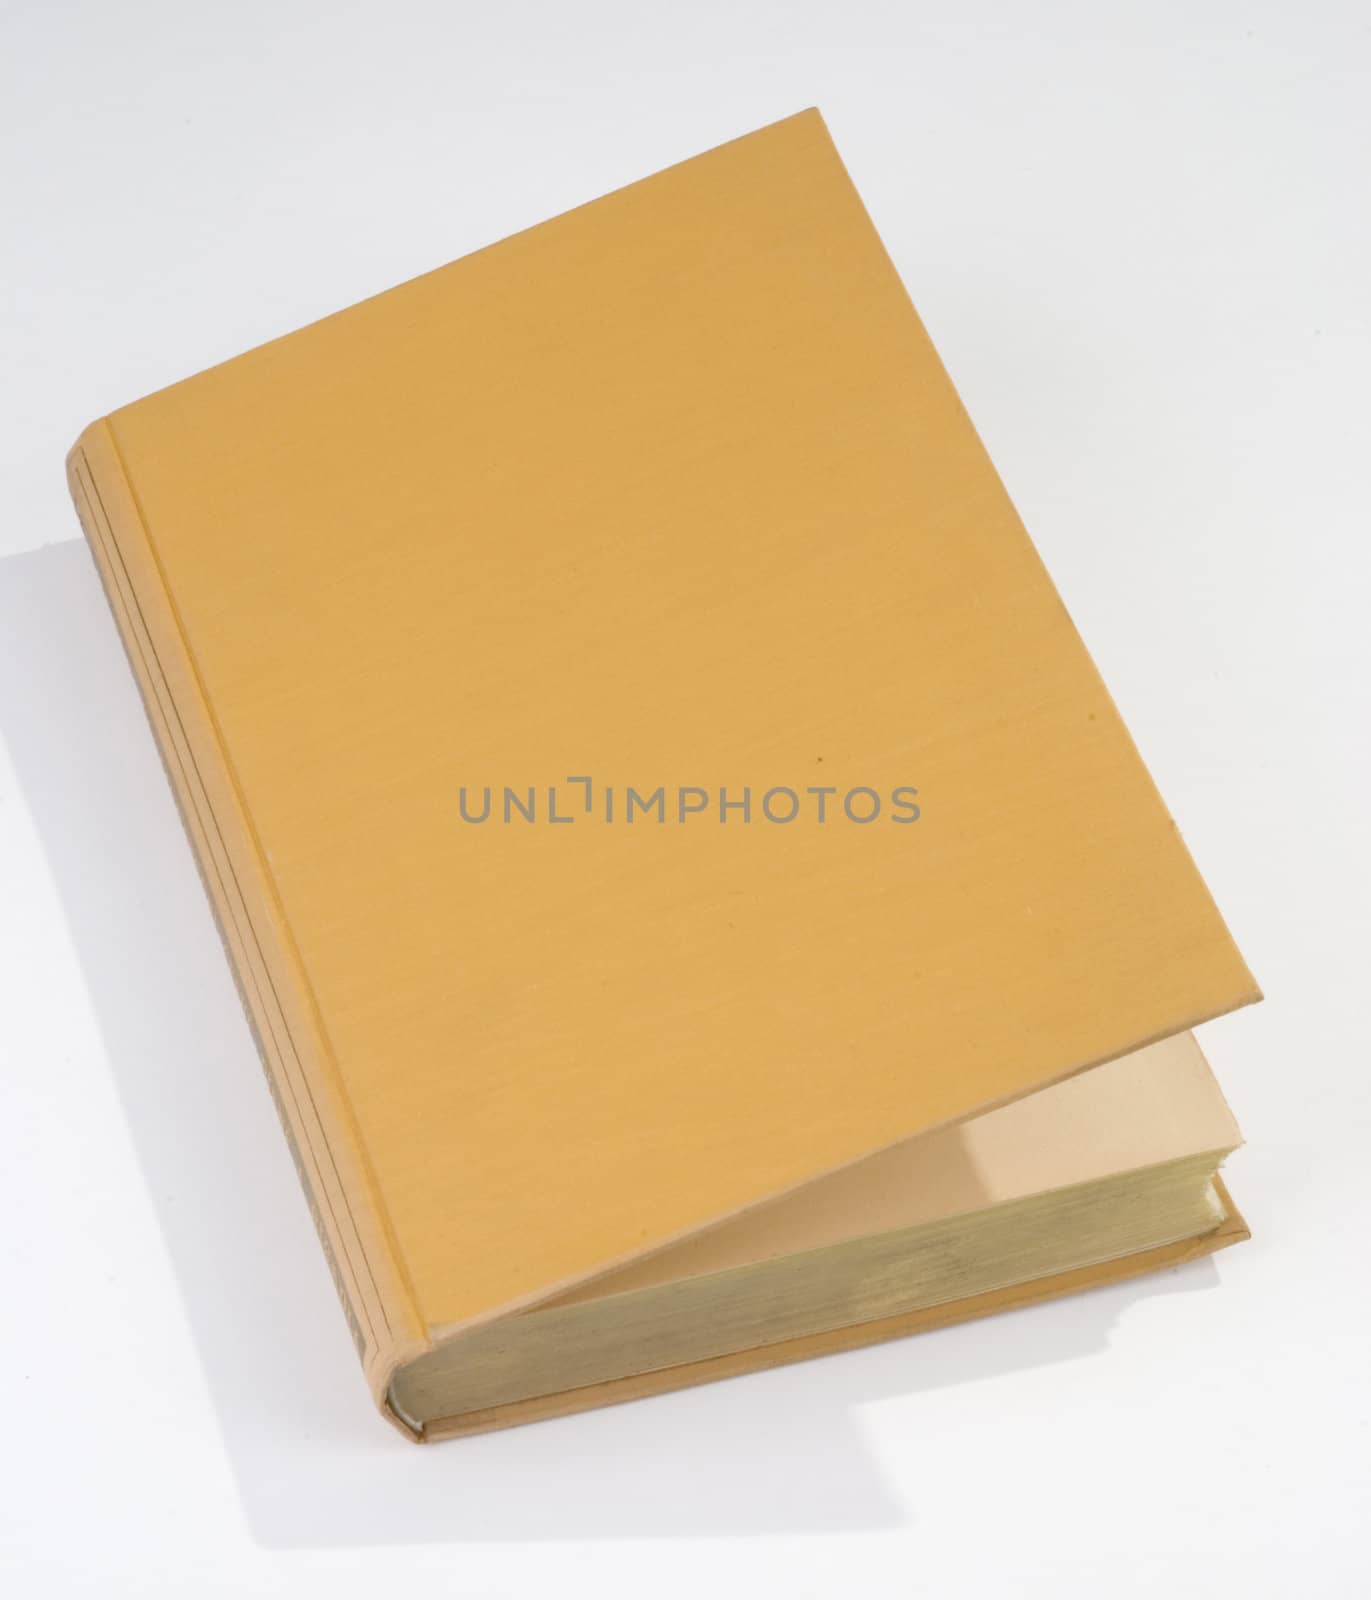 Blank old book cover yellow by hanusst